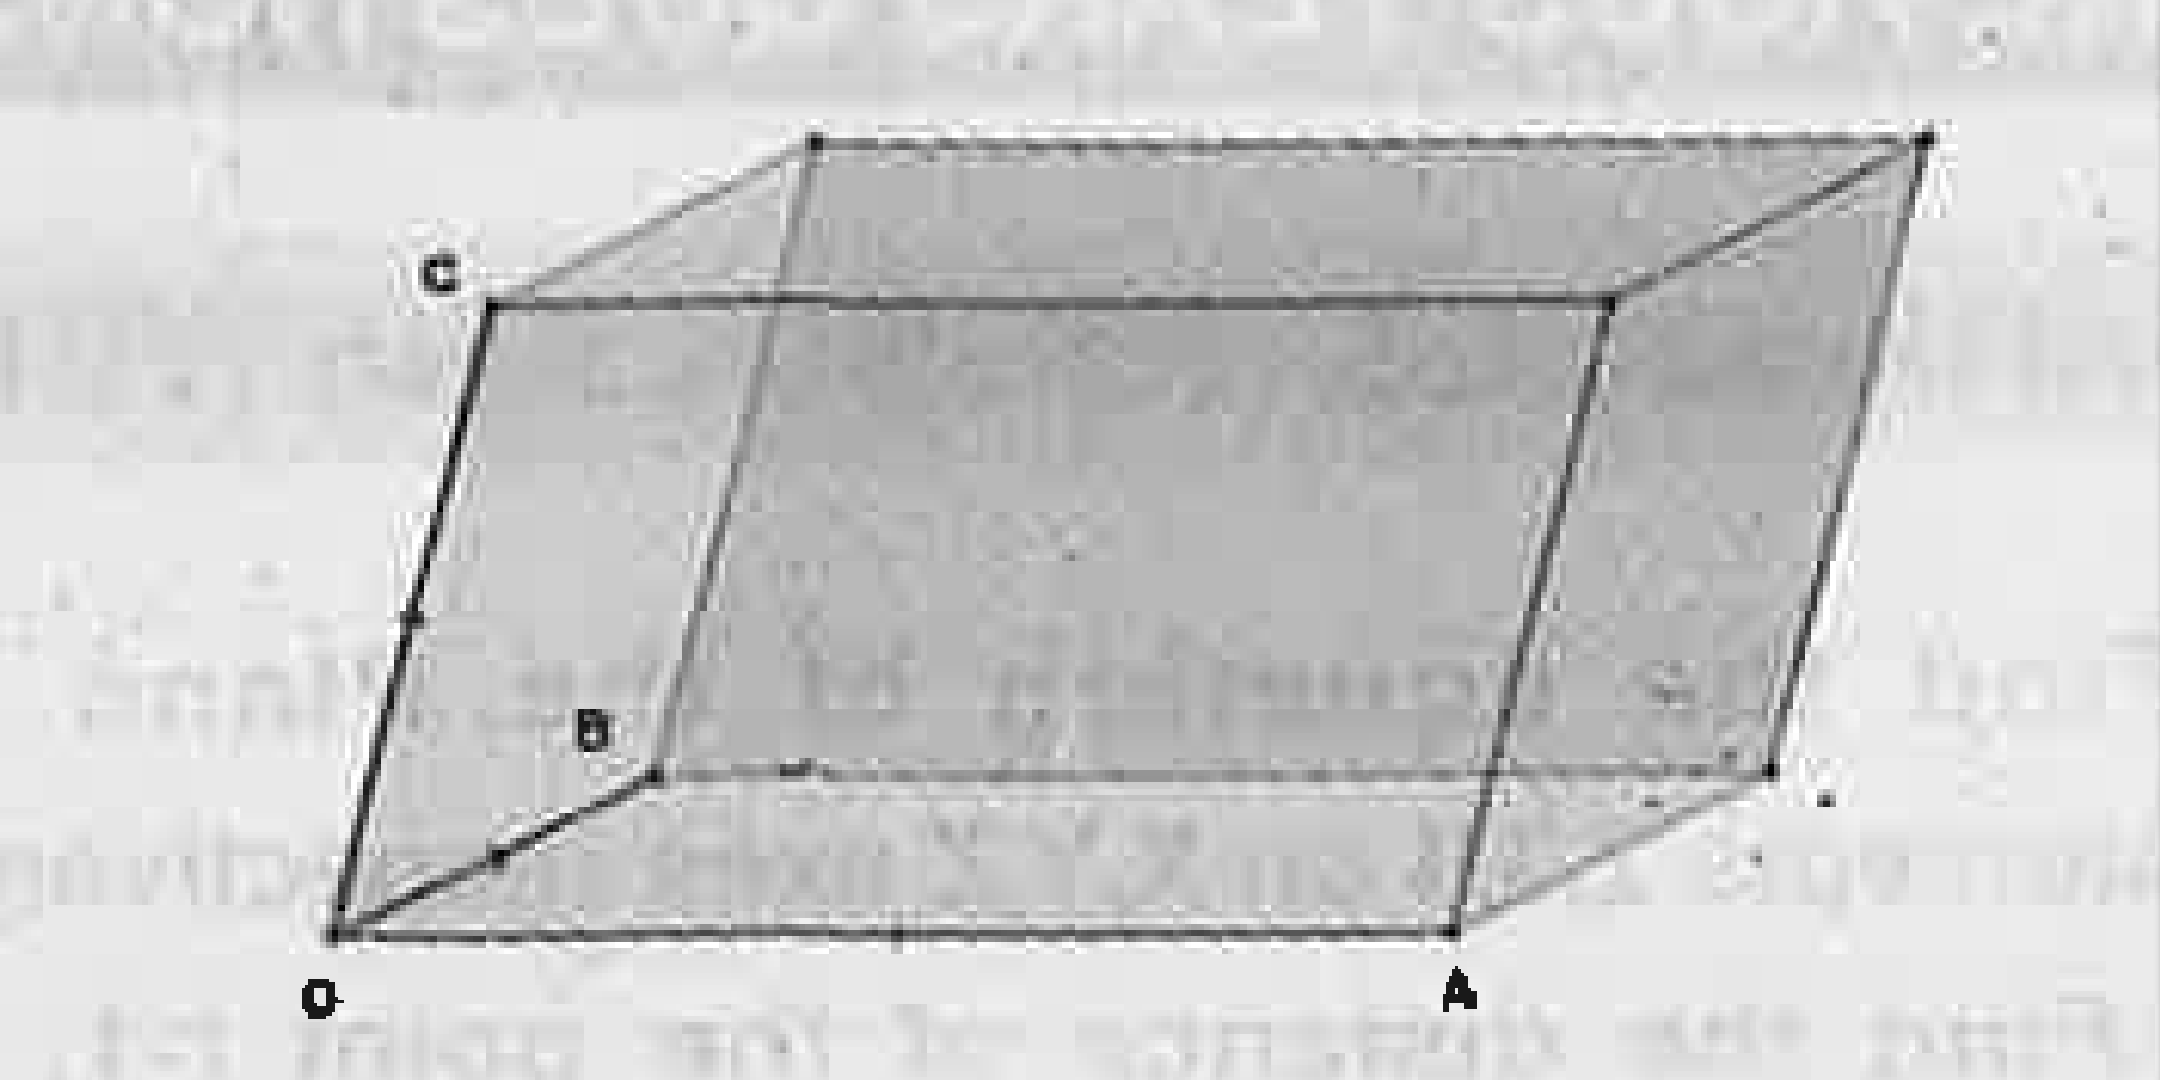 bar(OA)=i+2j+3k   bar(OB)=i-2j+4k   bar(OC)=2i+3j+k   are adjacent sides of the parallelopiped.   Find the base area of the parallelopiped.   (Base determined by bar(OA) and bar(OB))